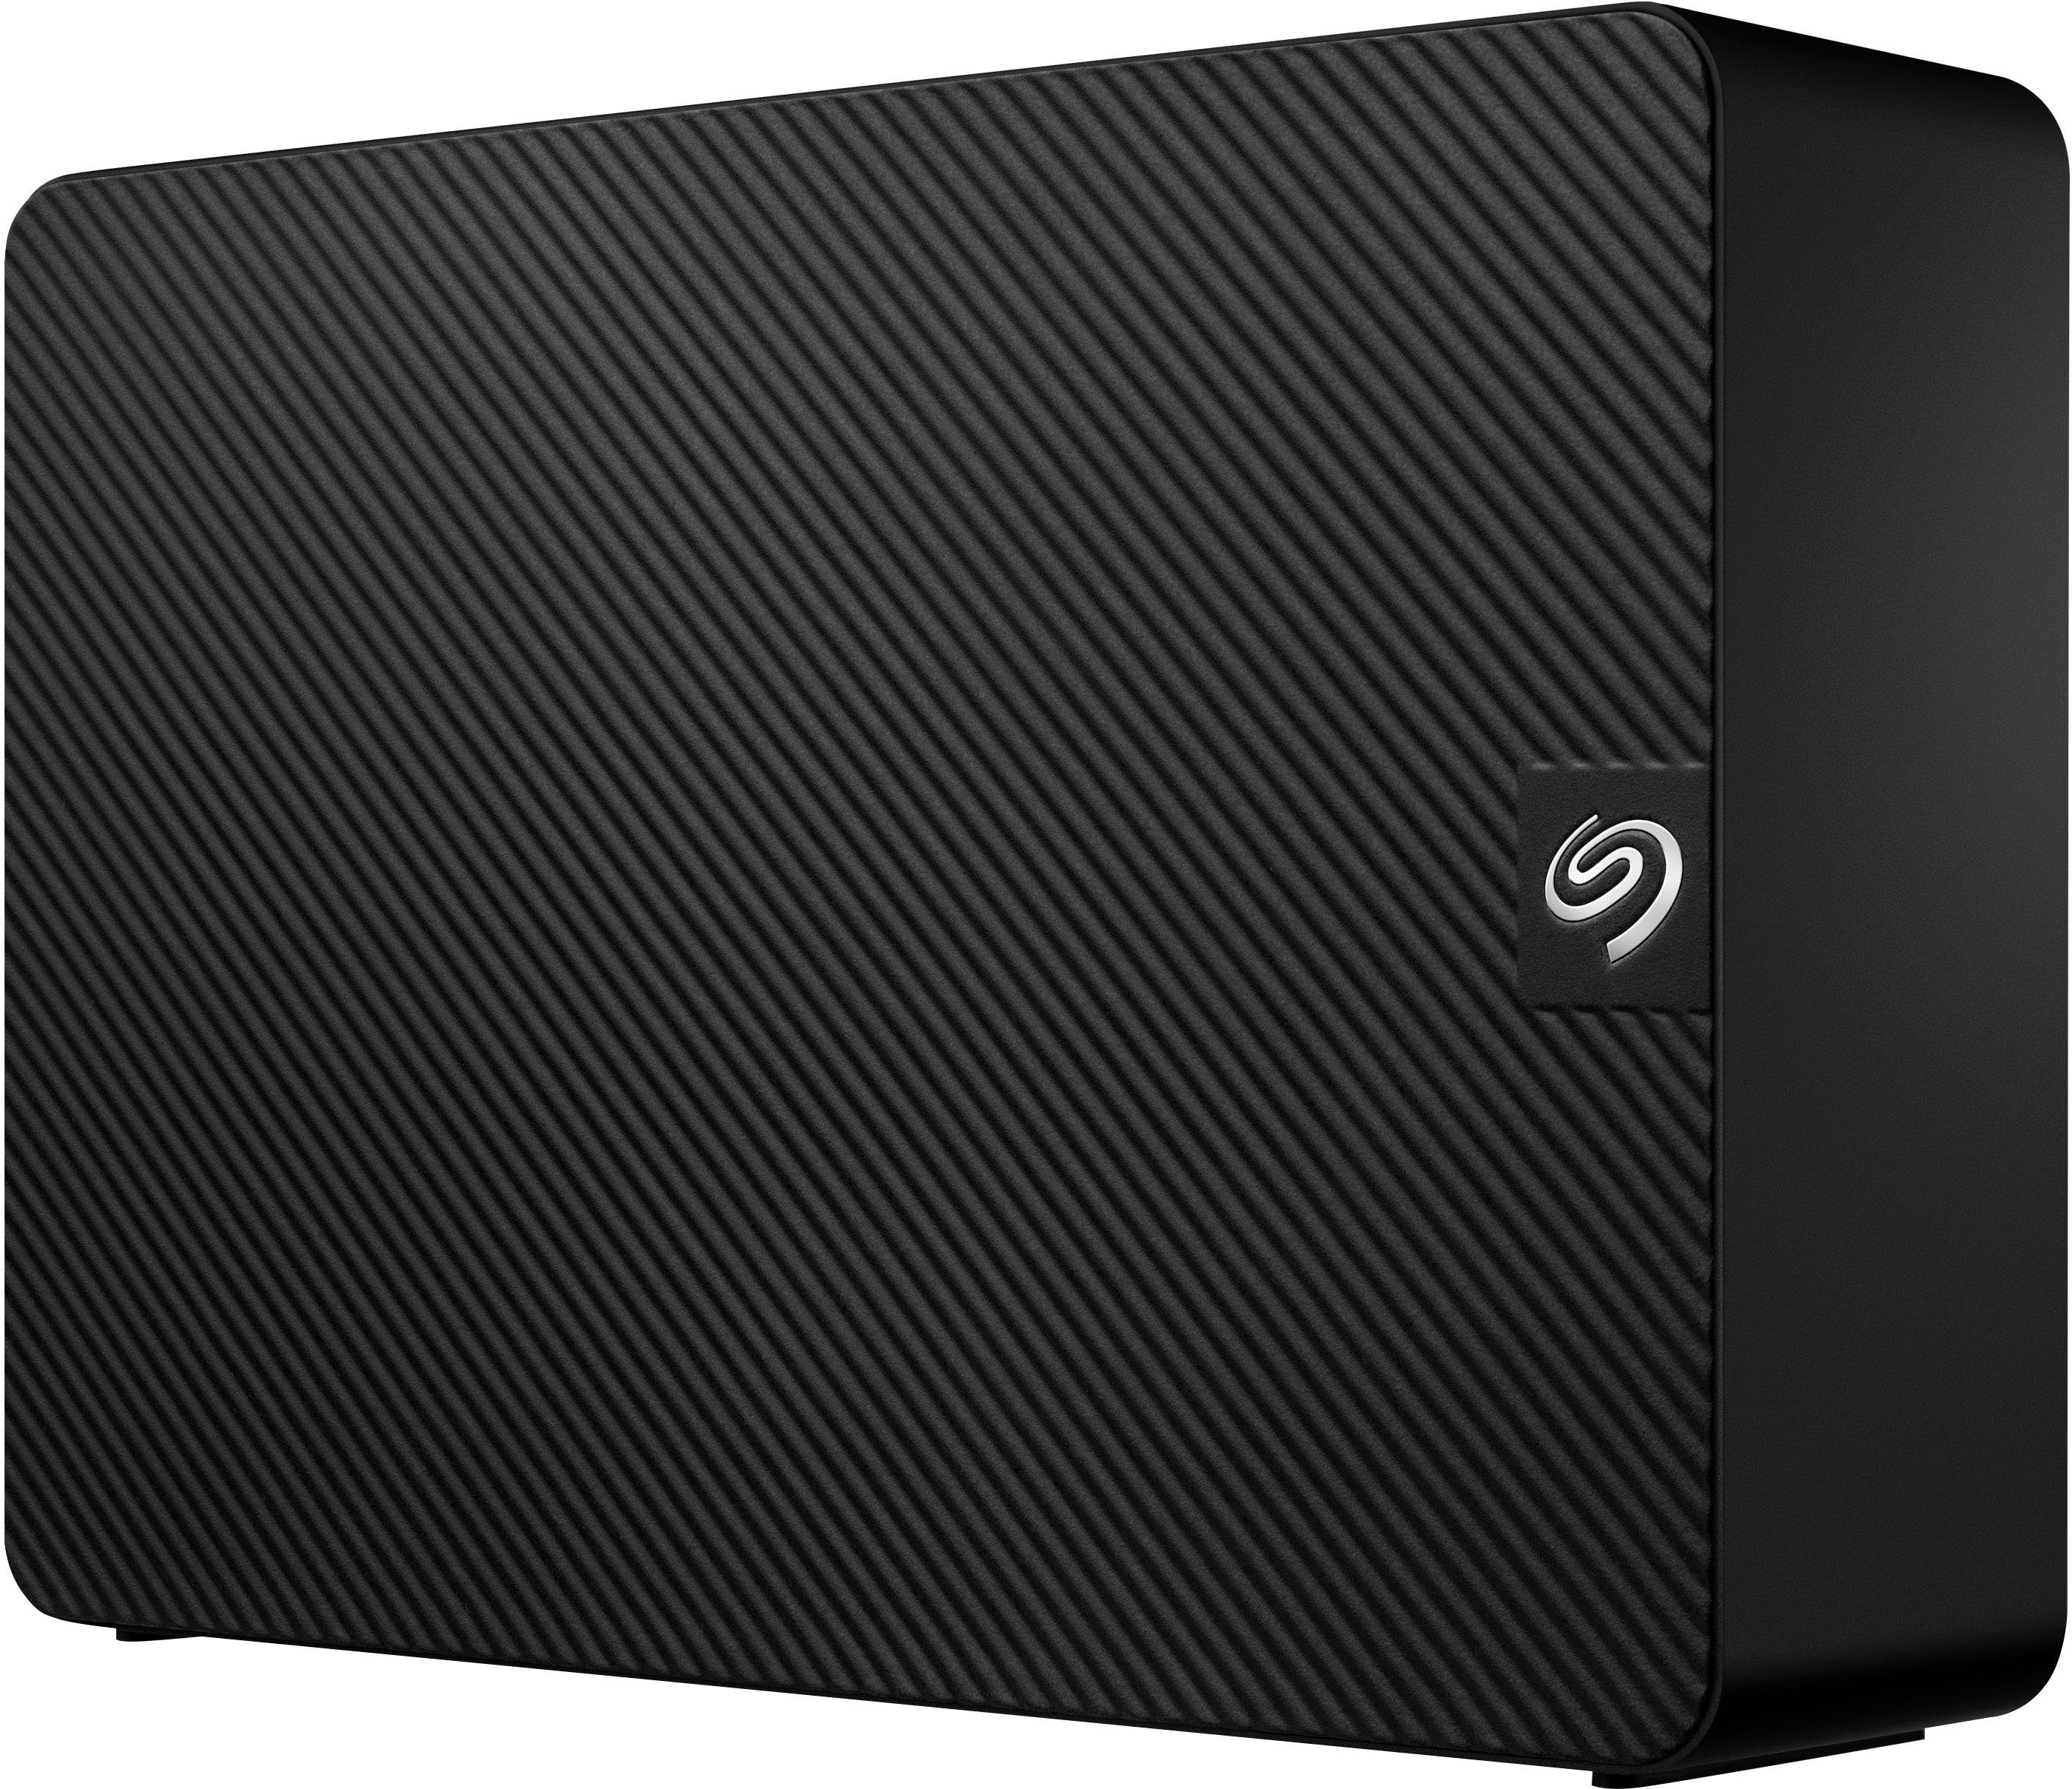 Angle View: Seagate - Expansion 12TB External USB 3.0 Portable Hard Drive with Rescue Data Recovery Services - Black